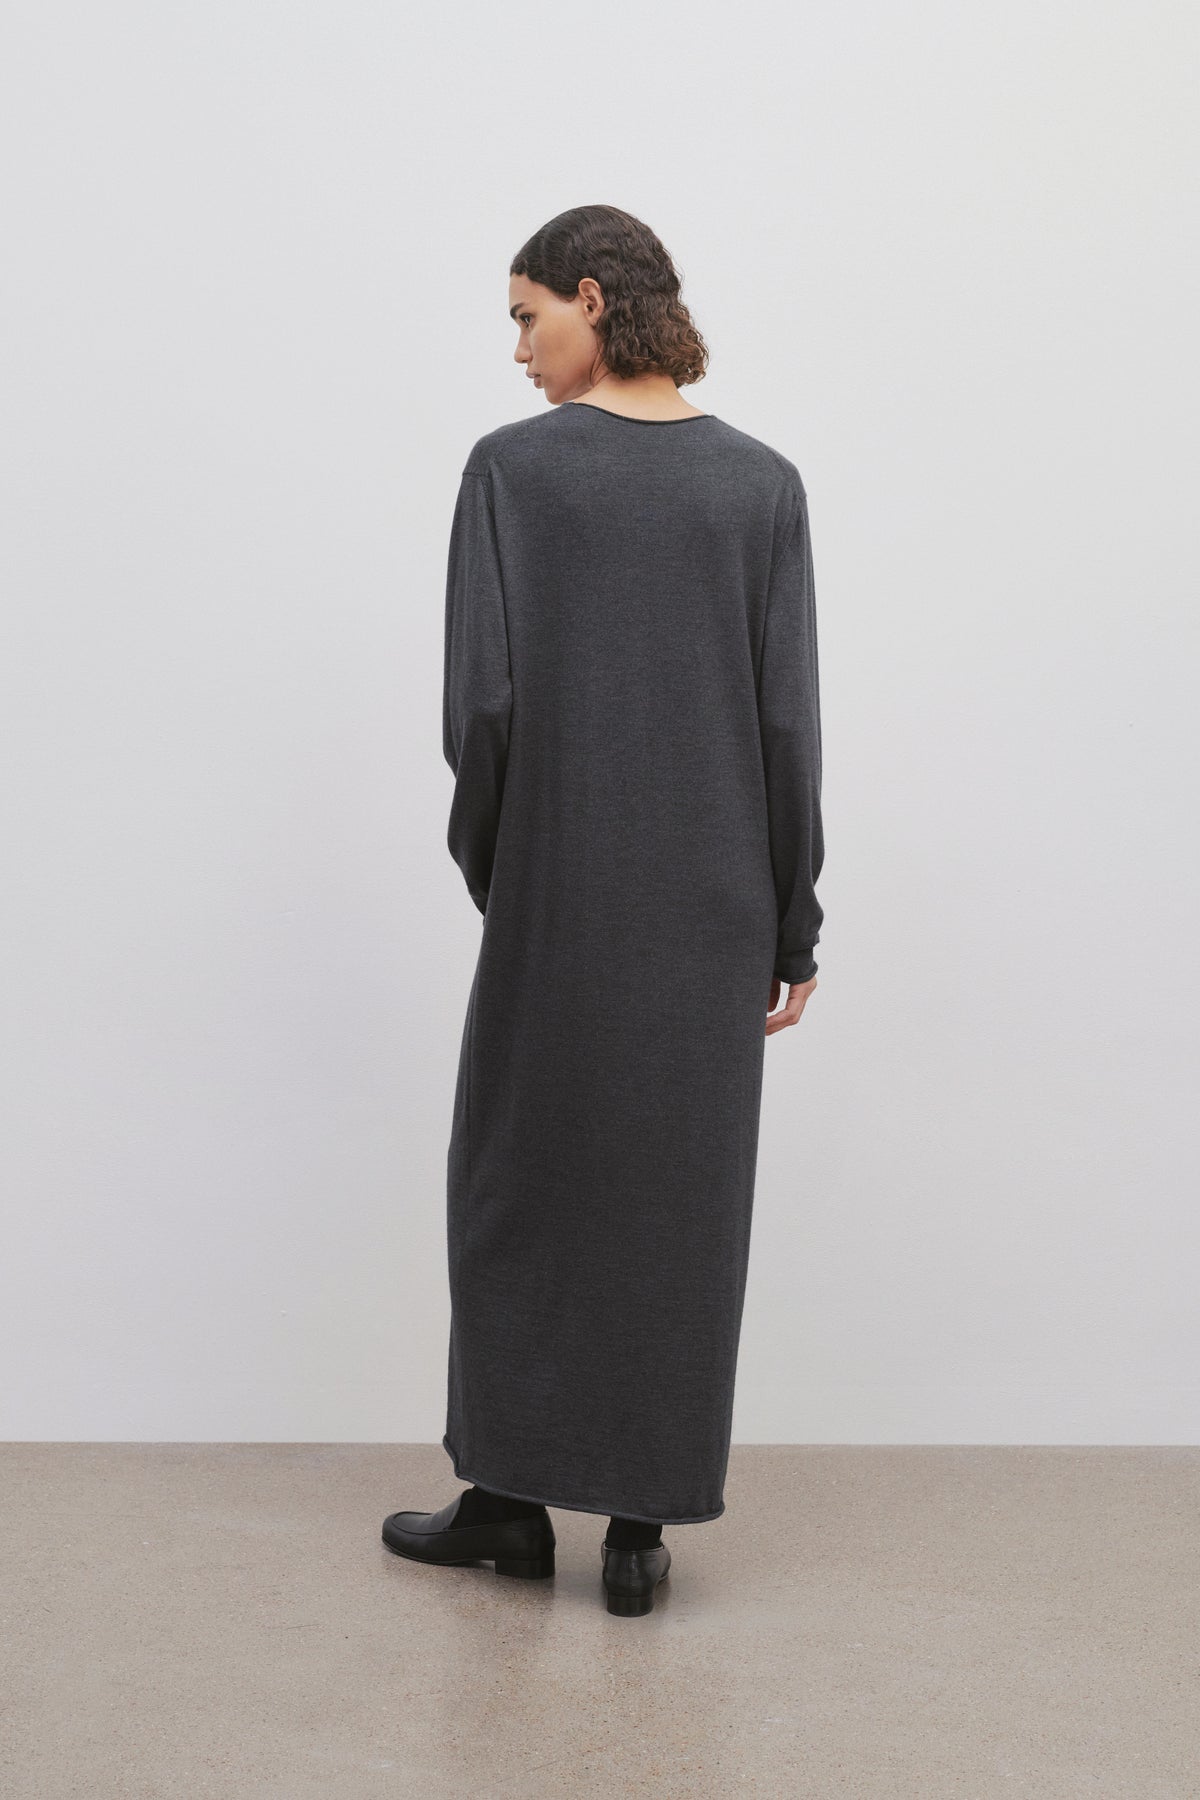 Dej Dress in Wool and Cashmere